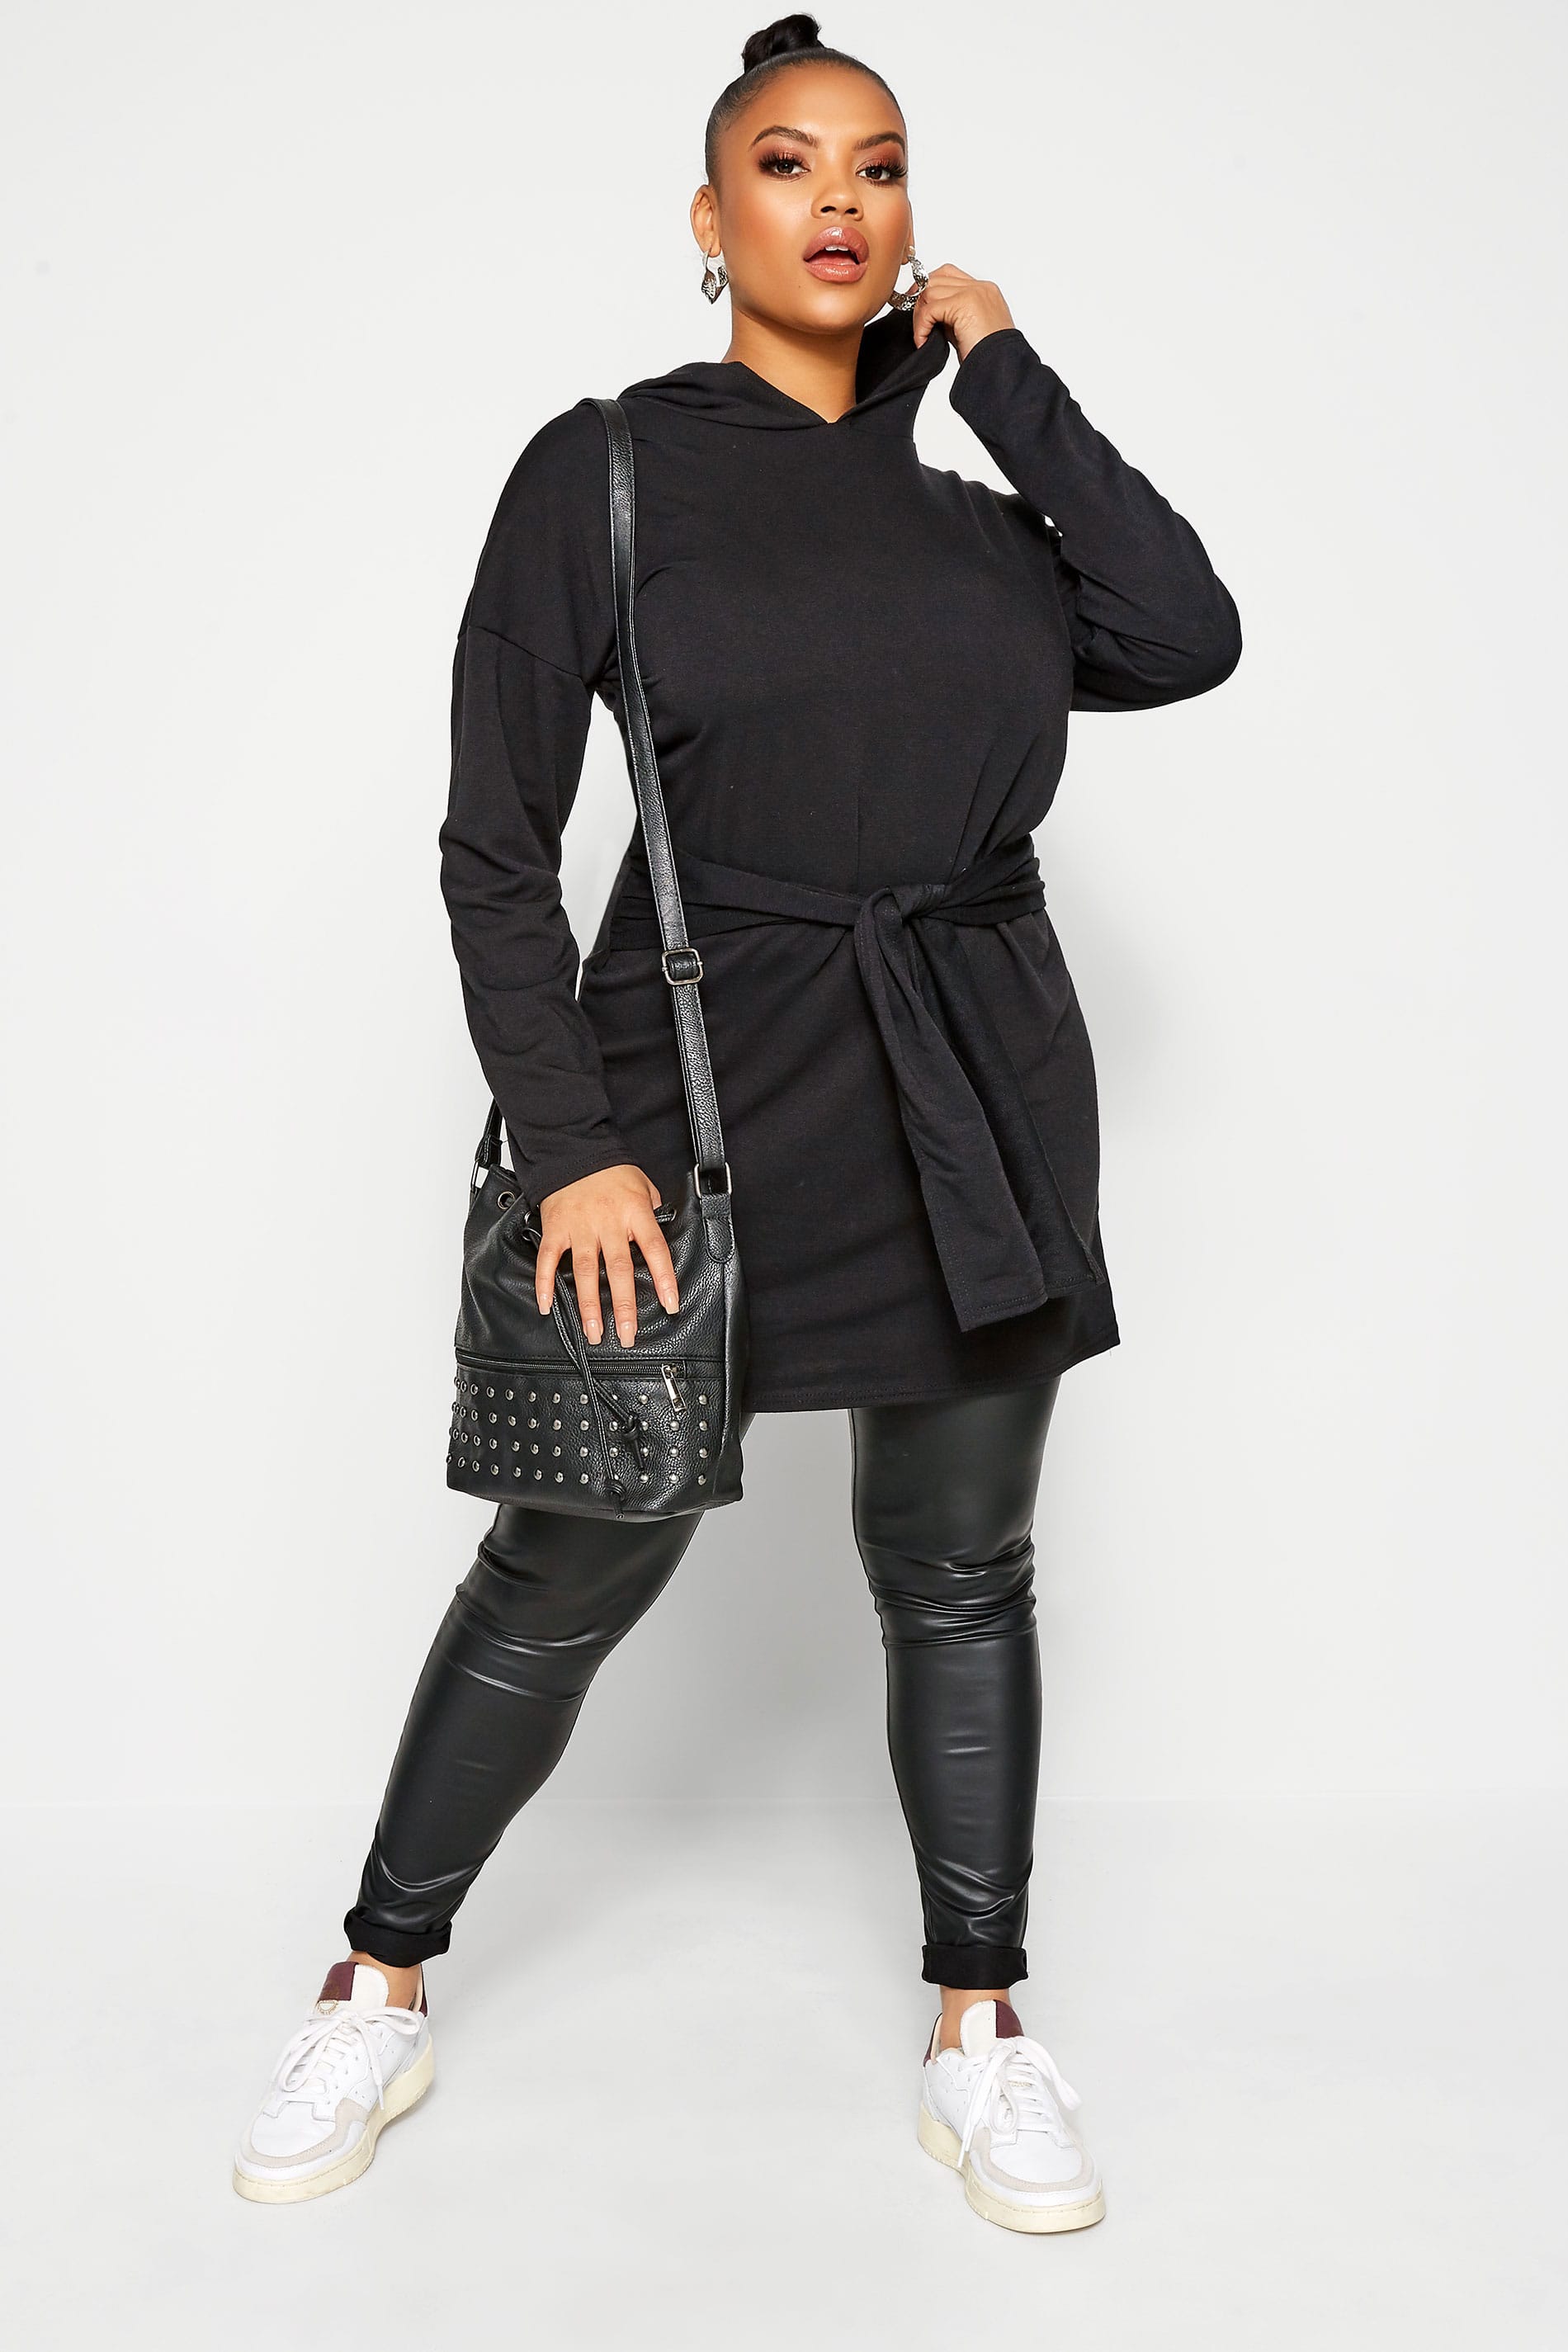 LIMITED COLLECTION Black Tie Waist Hoodie Dress | Yours Clothing